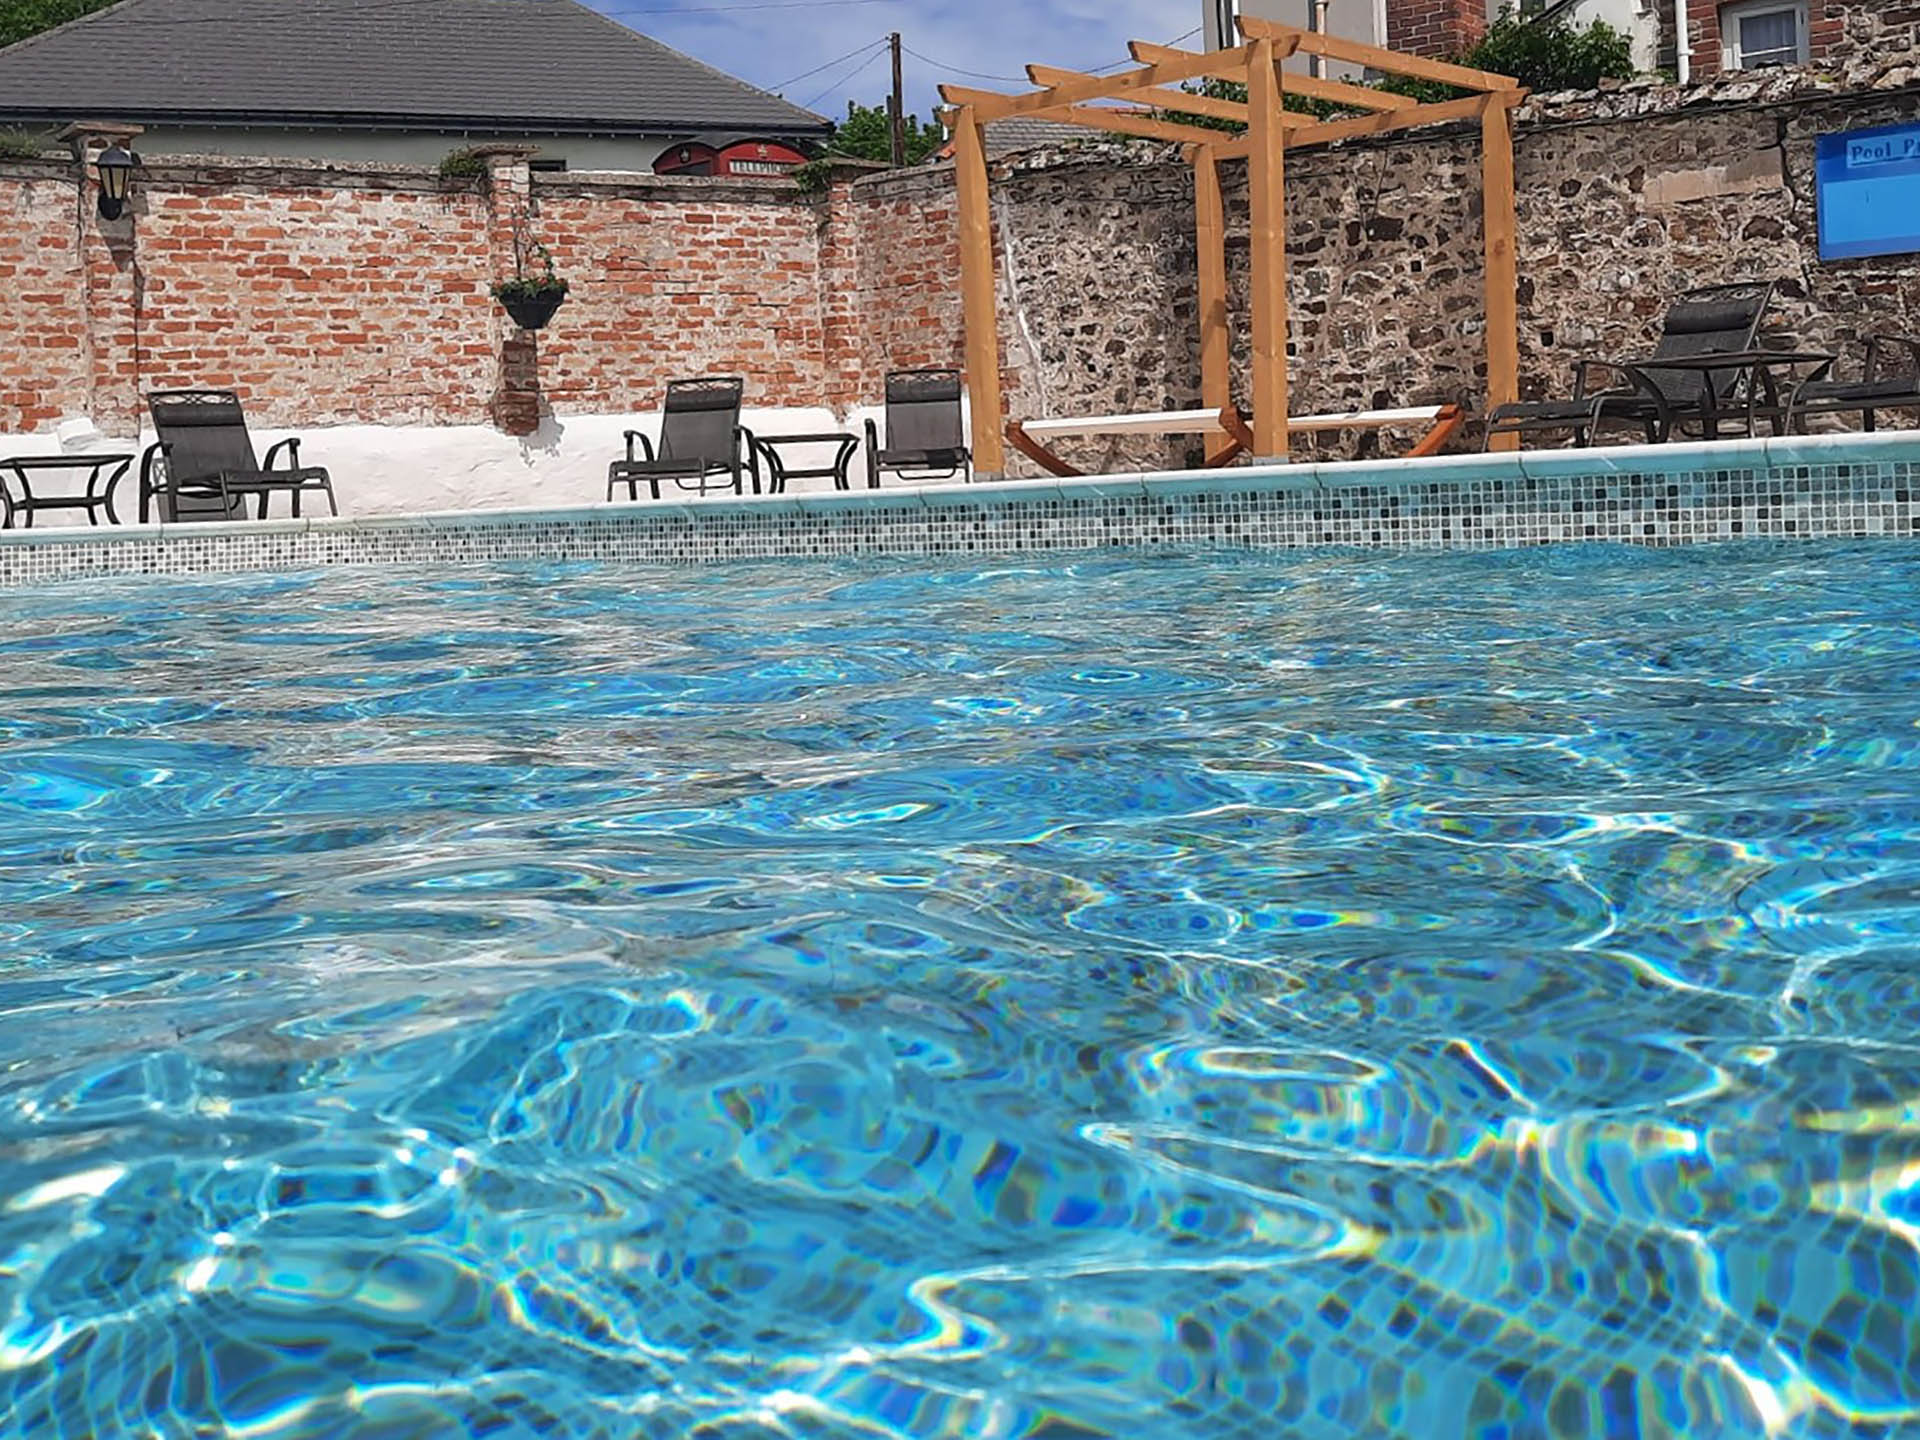 Outdoor Pool at the Broomhill Manor Holiday Cottages